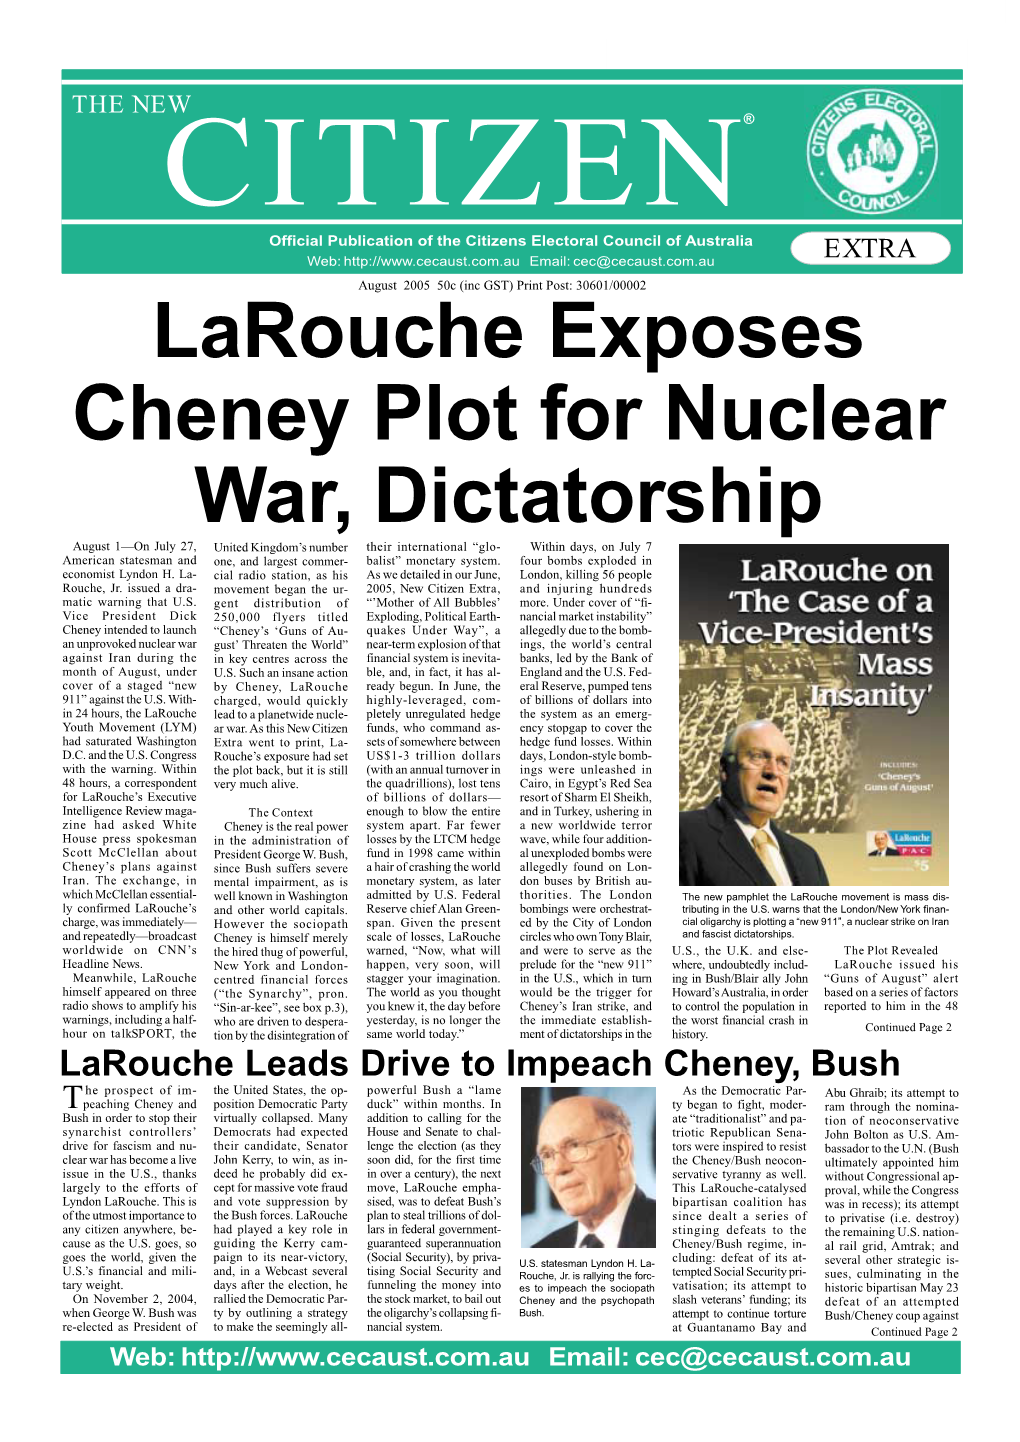 Larouche Exposes Cheney Plot for Nuclear War, Dictatorship